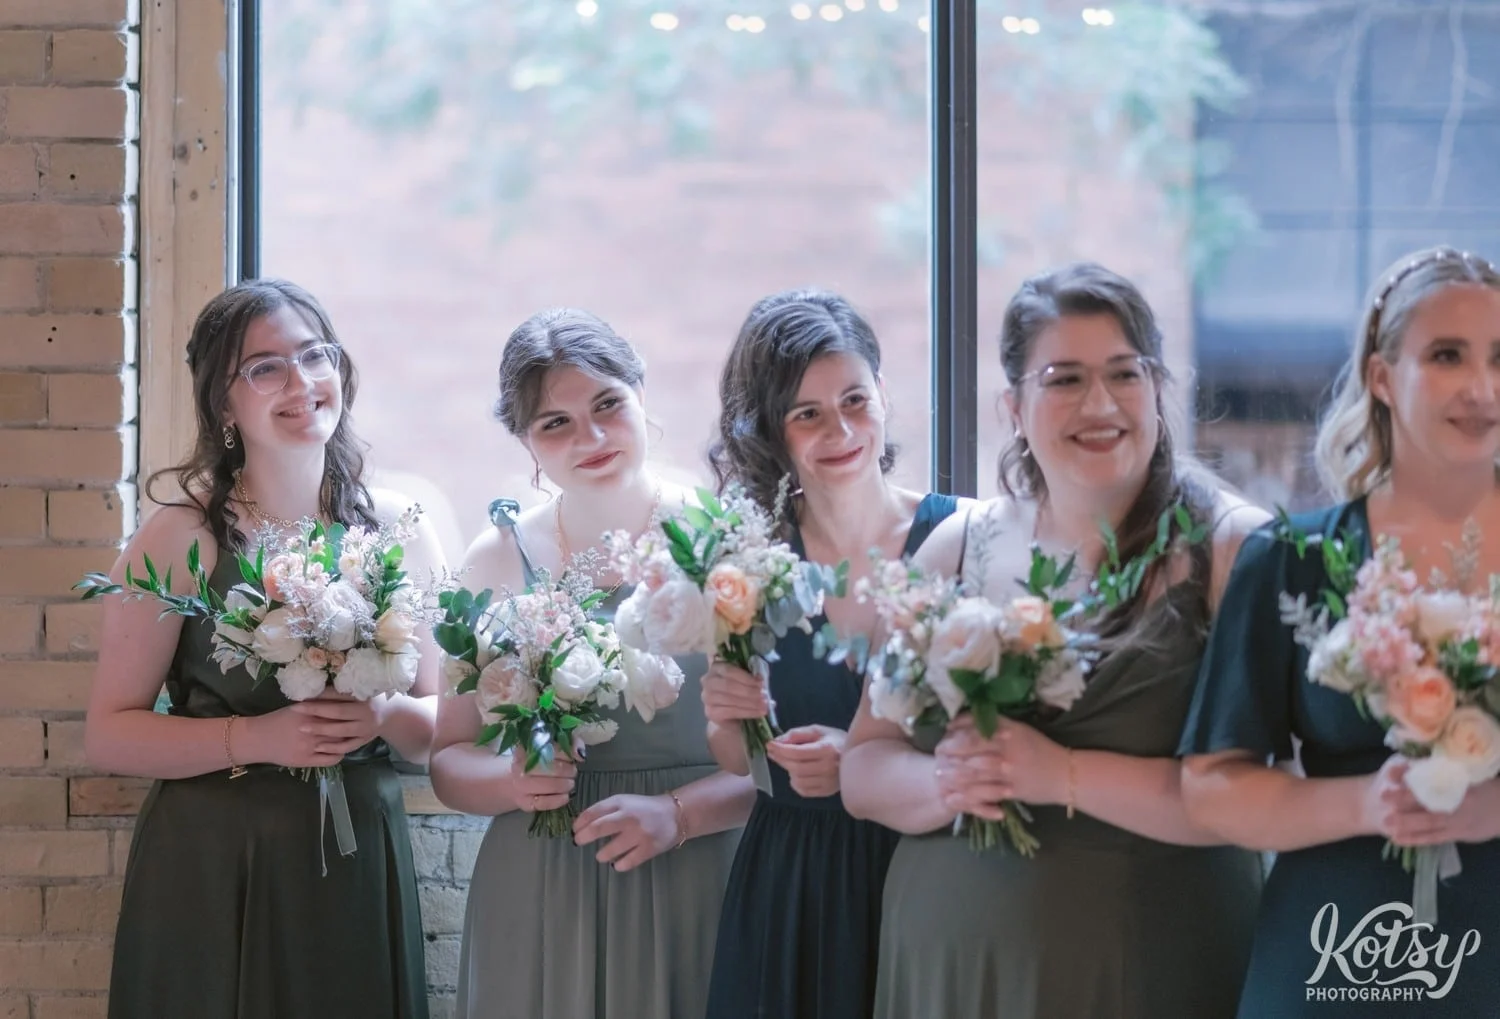 A row of bridesmaids and green dresses holding flower bouquets watch with smiles during a Second Floor Events wedding ceremony in Toronto, Canada